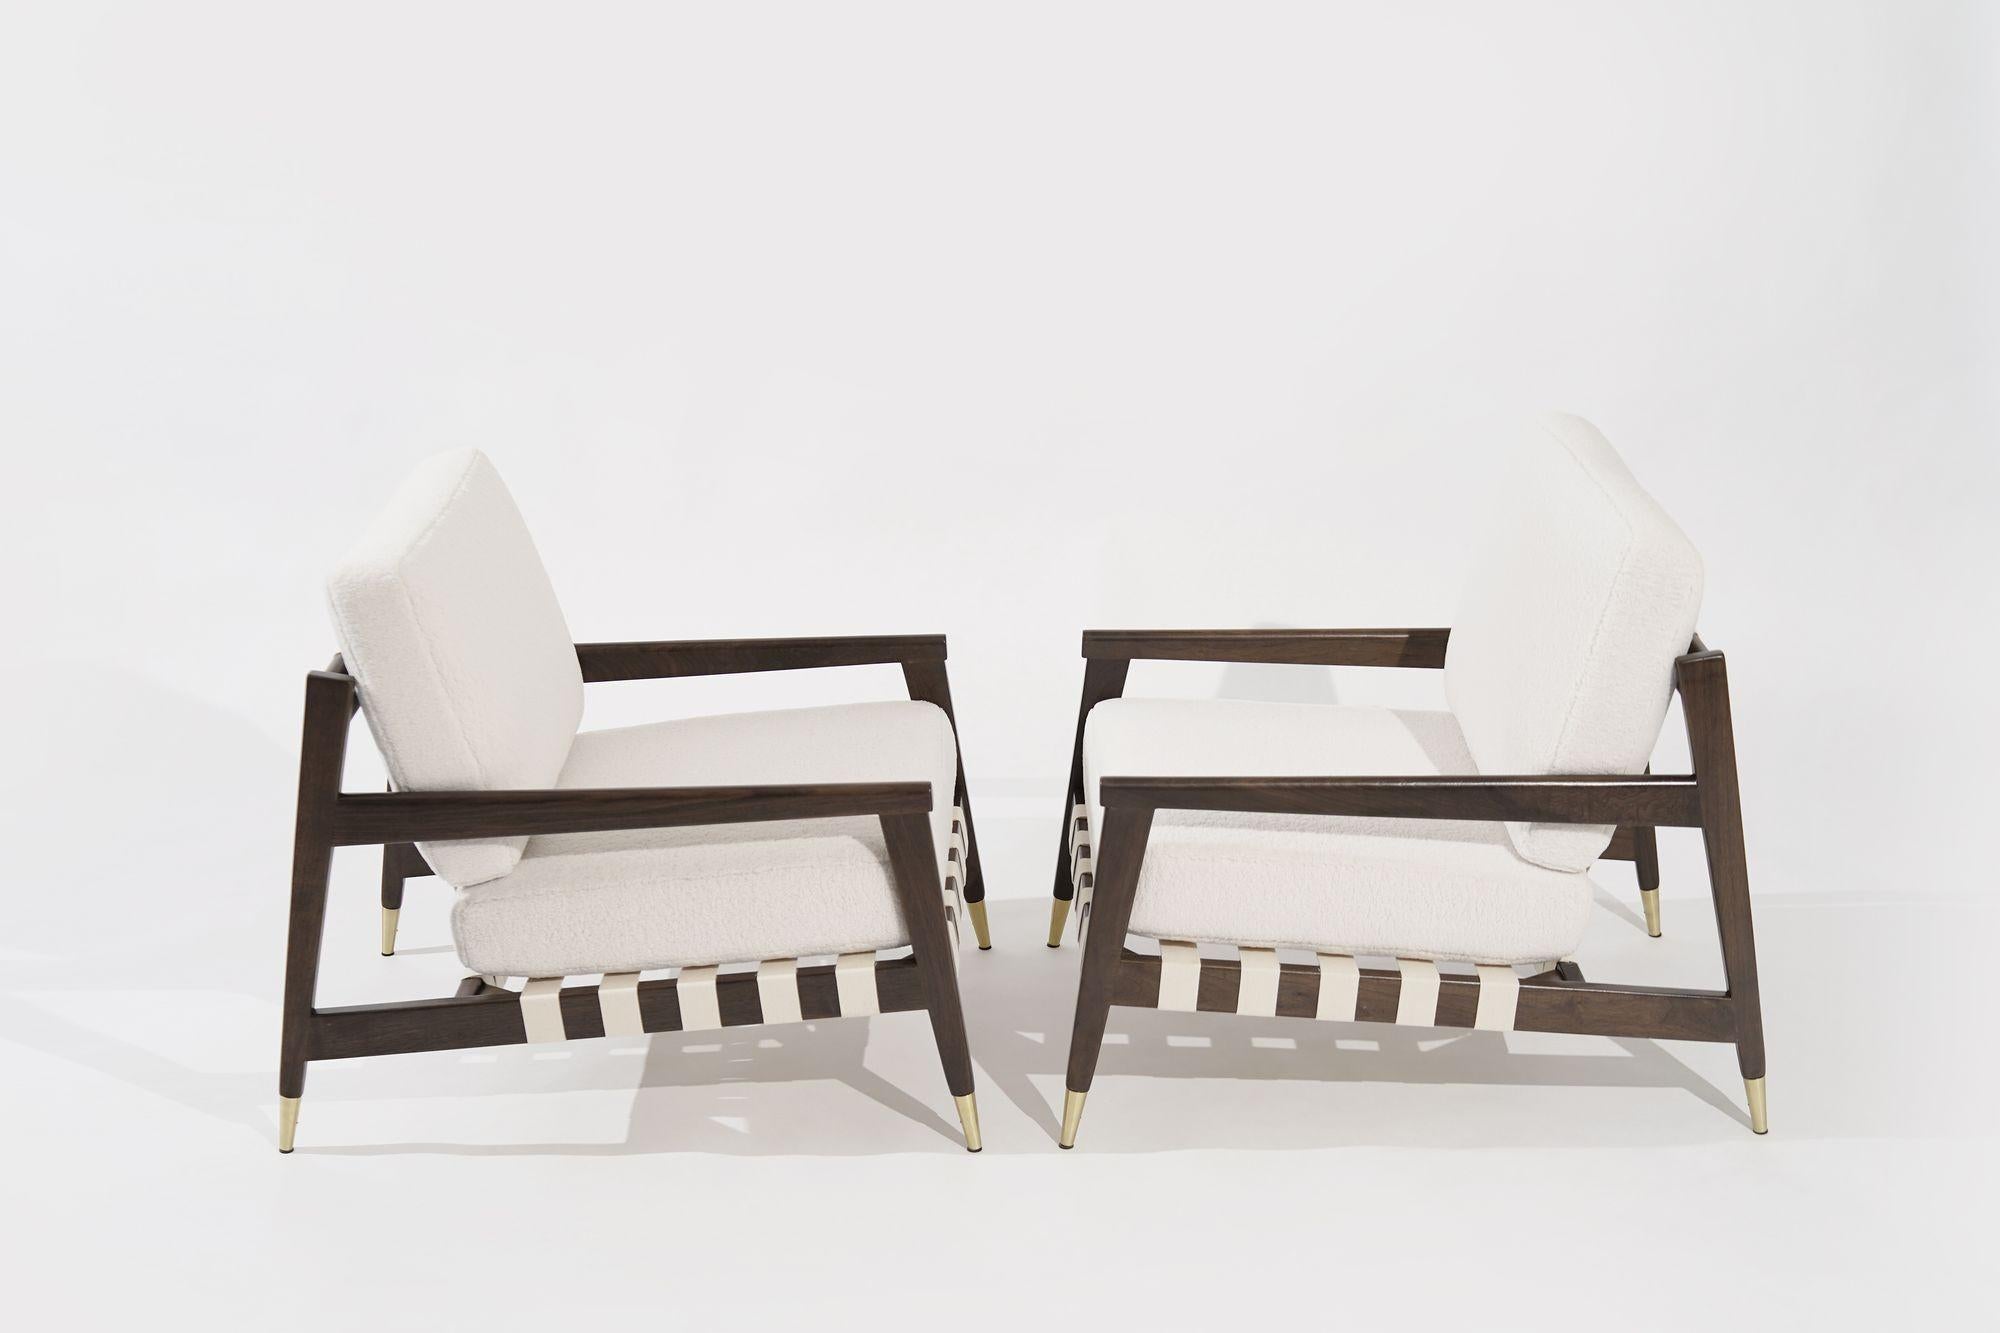 A set of meticulously restored lounge chairs, designed by the eminent Edmond J. Spence in the 1950s for Urban-Aire Group, now revived to their former glory by Stamford Modern. These iconic chairs embody the epitome of mid-century design, offering a